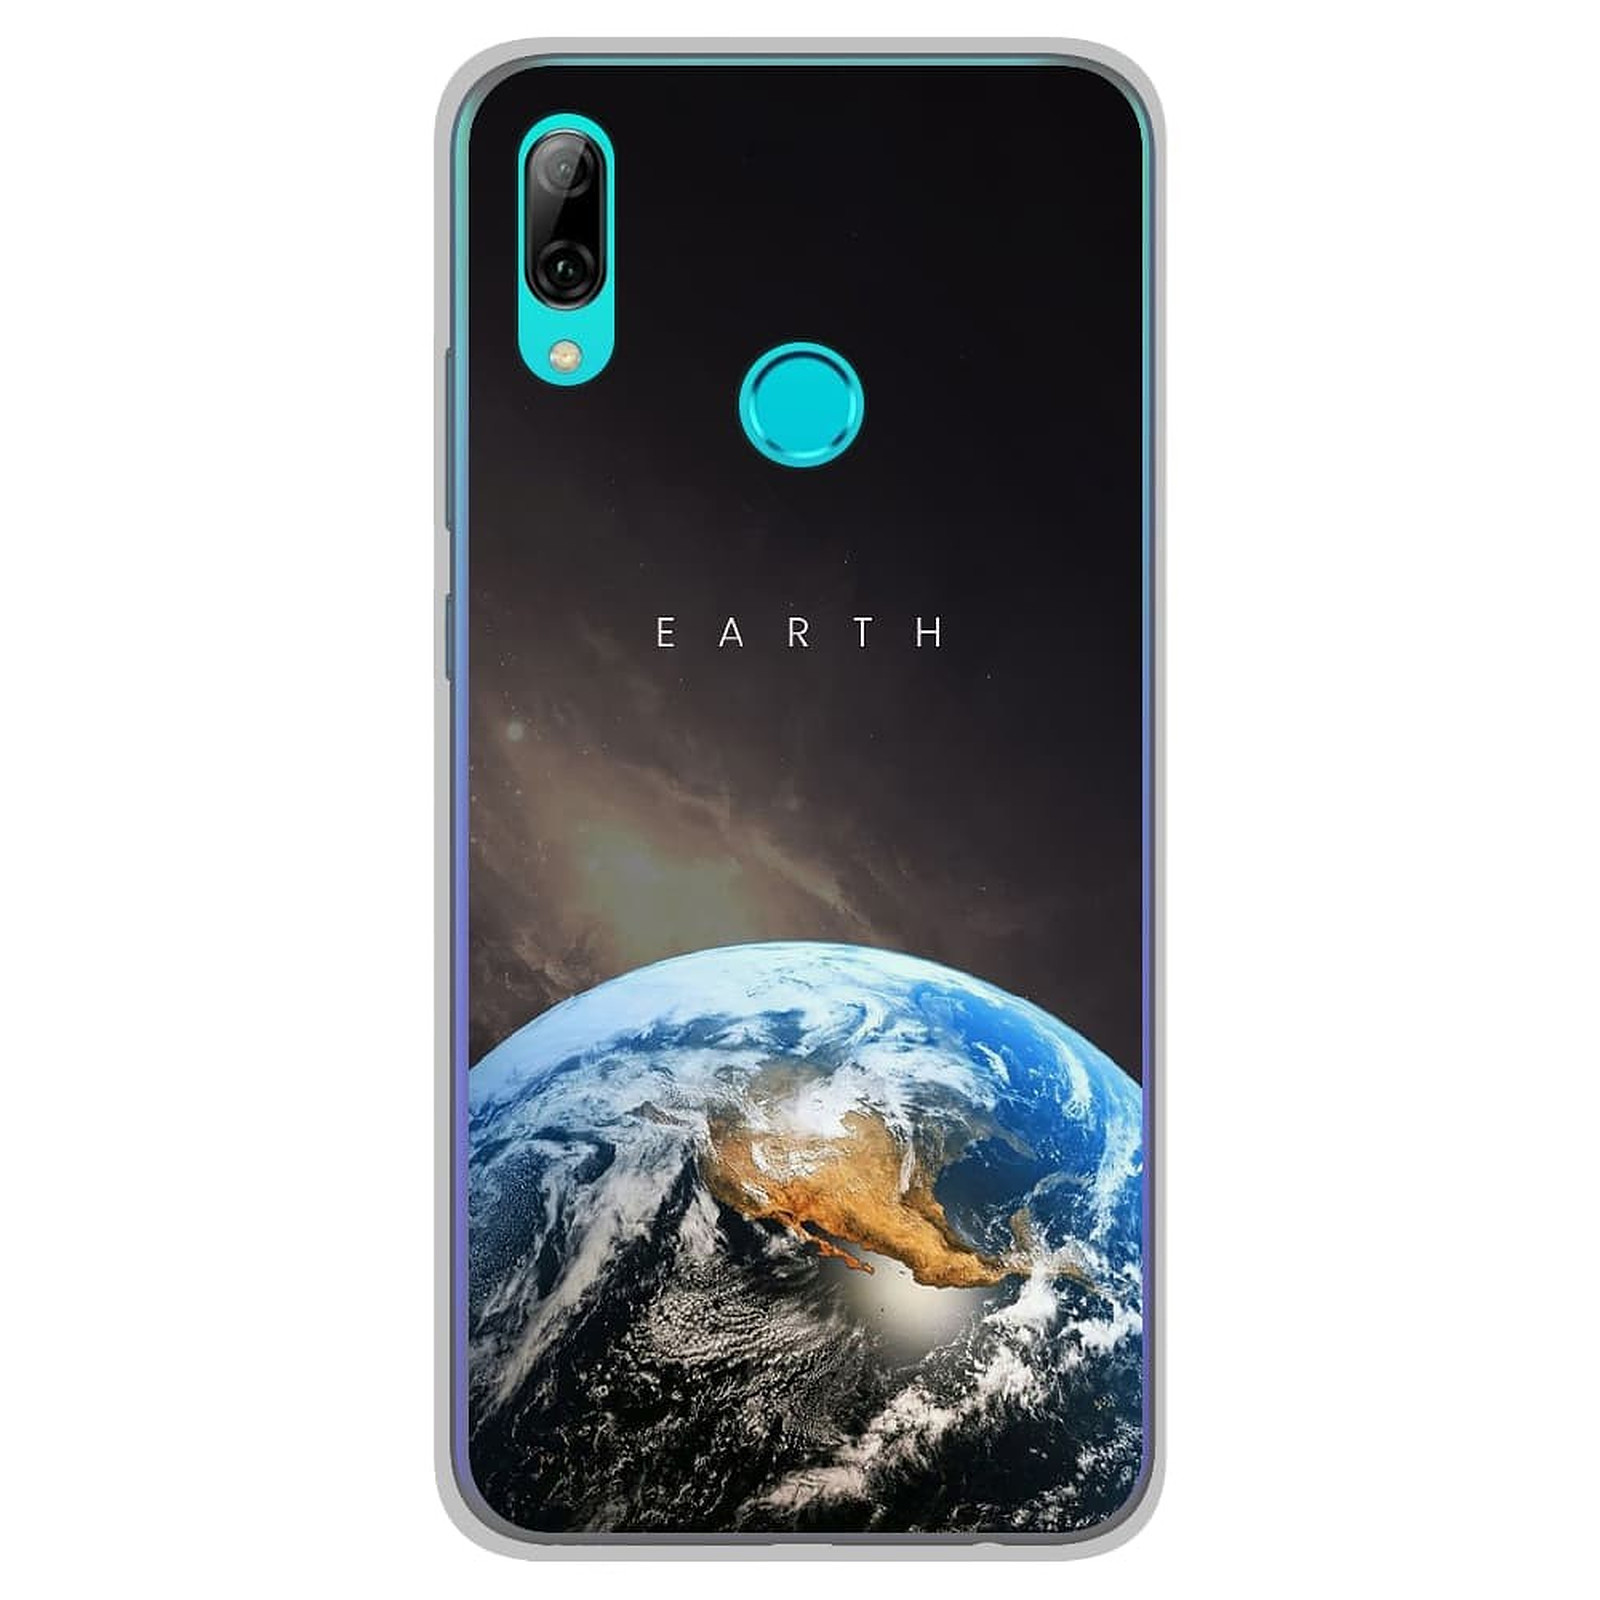 1001 Coques Coque silicone gel Huawei P Smart 2019 motif Earth - Coque telephone 1001Coques